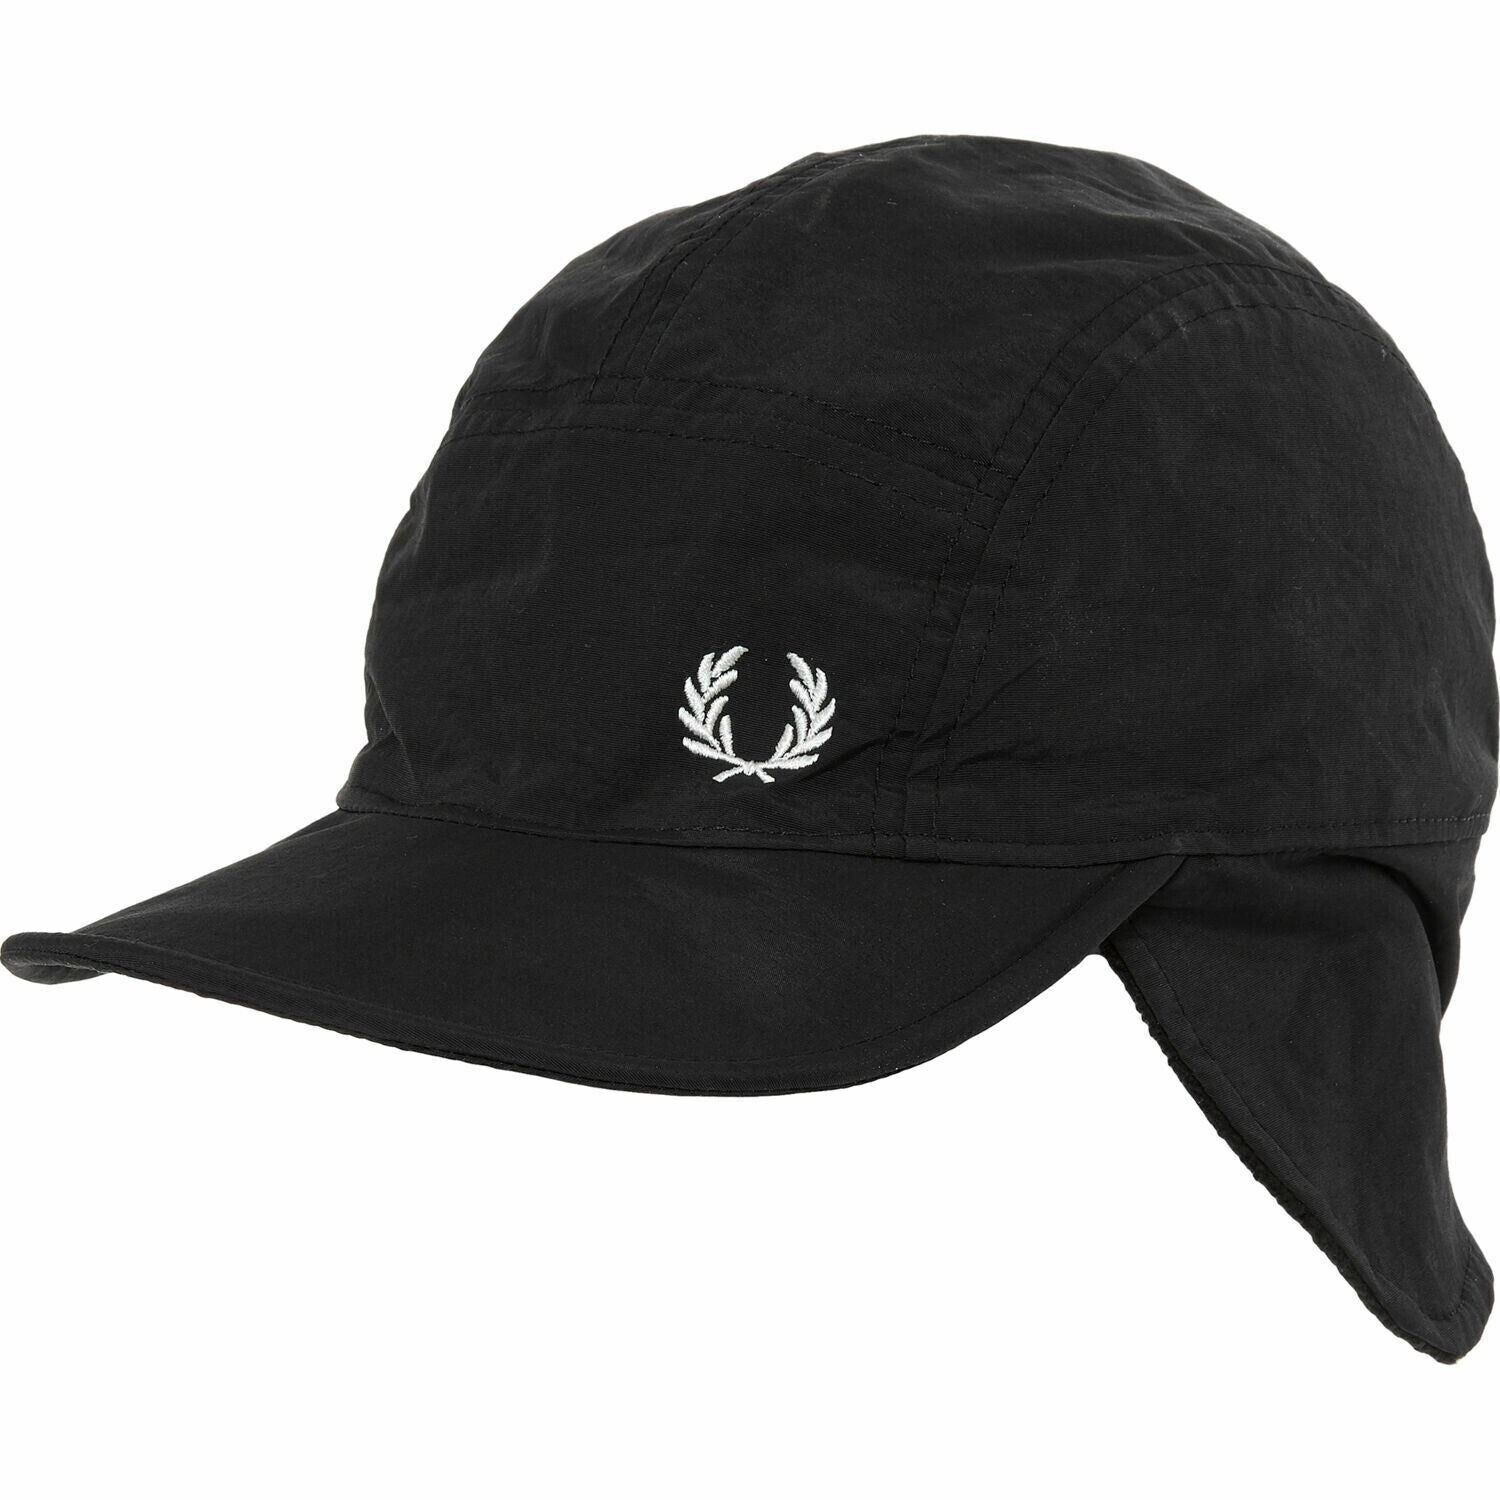 FRED PERRY Mens Ear Flap Cap, Black Nylon, Fleece Lined, One Size